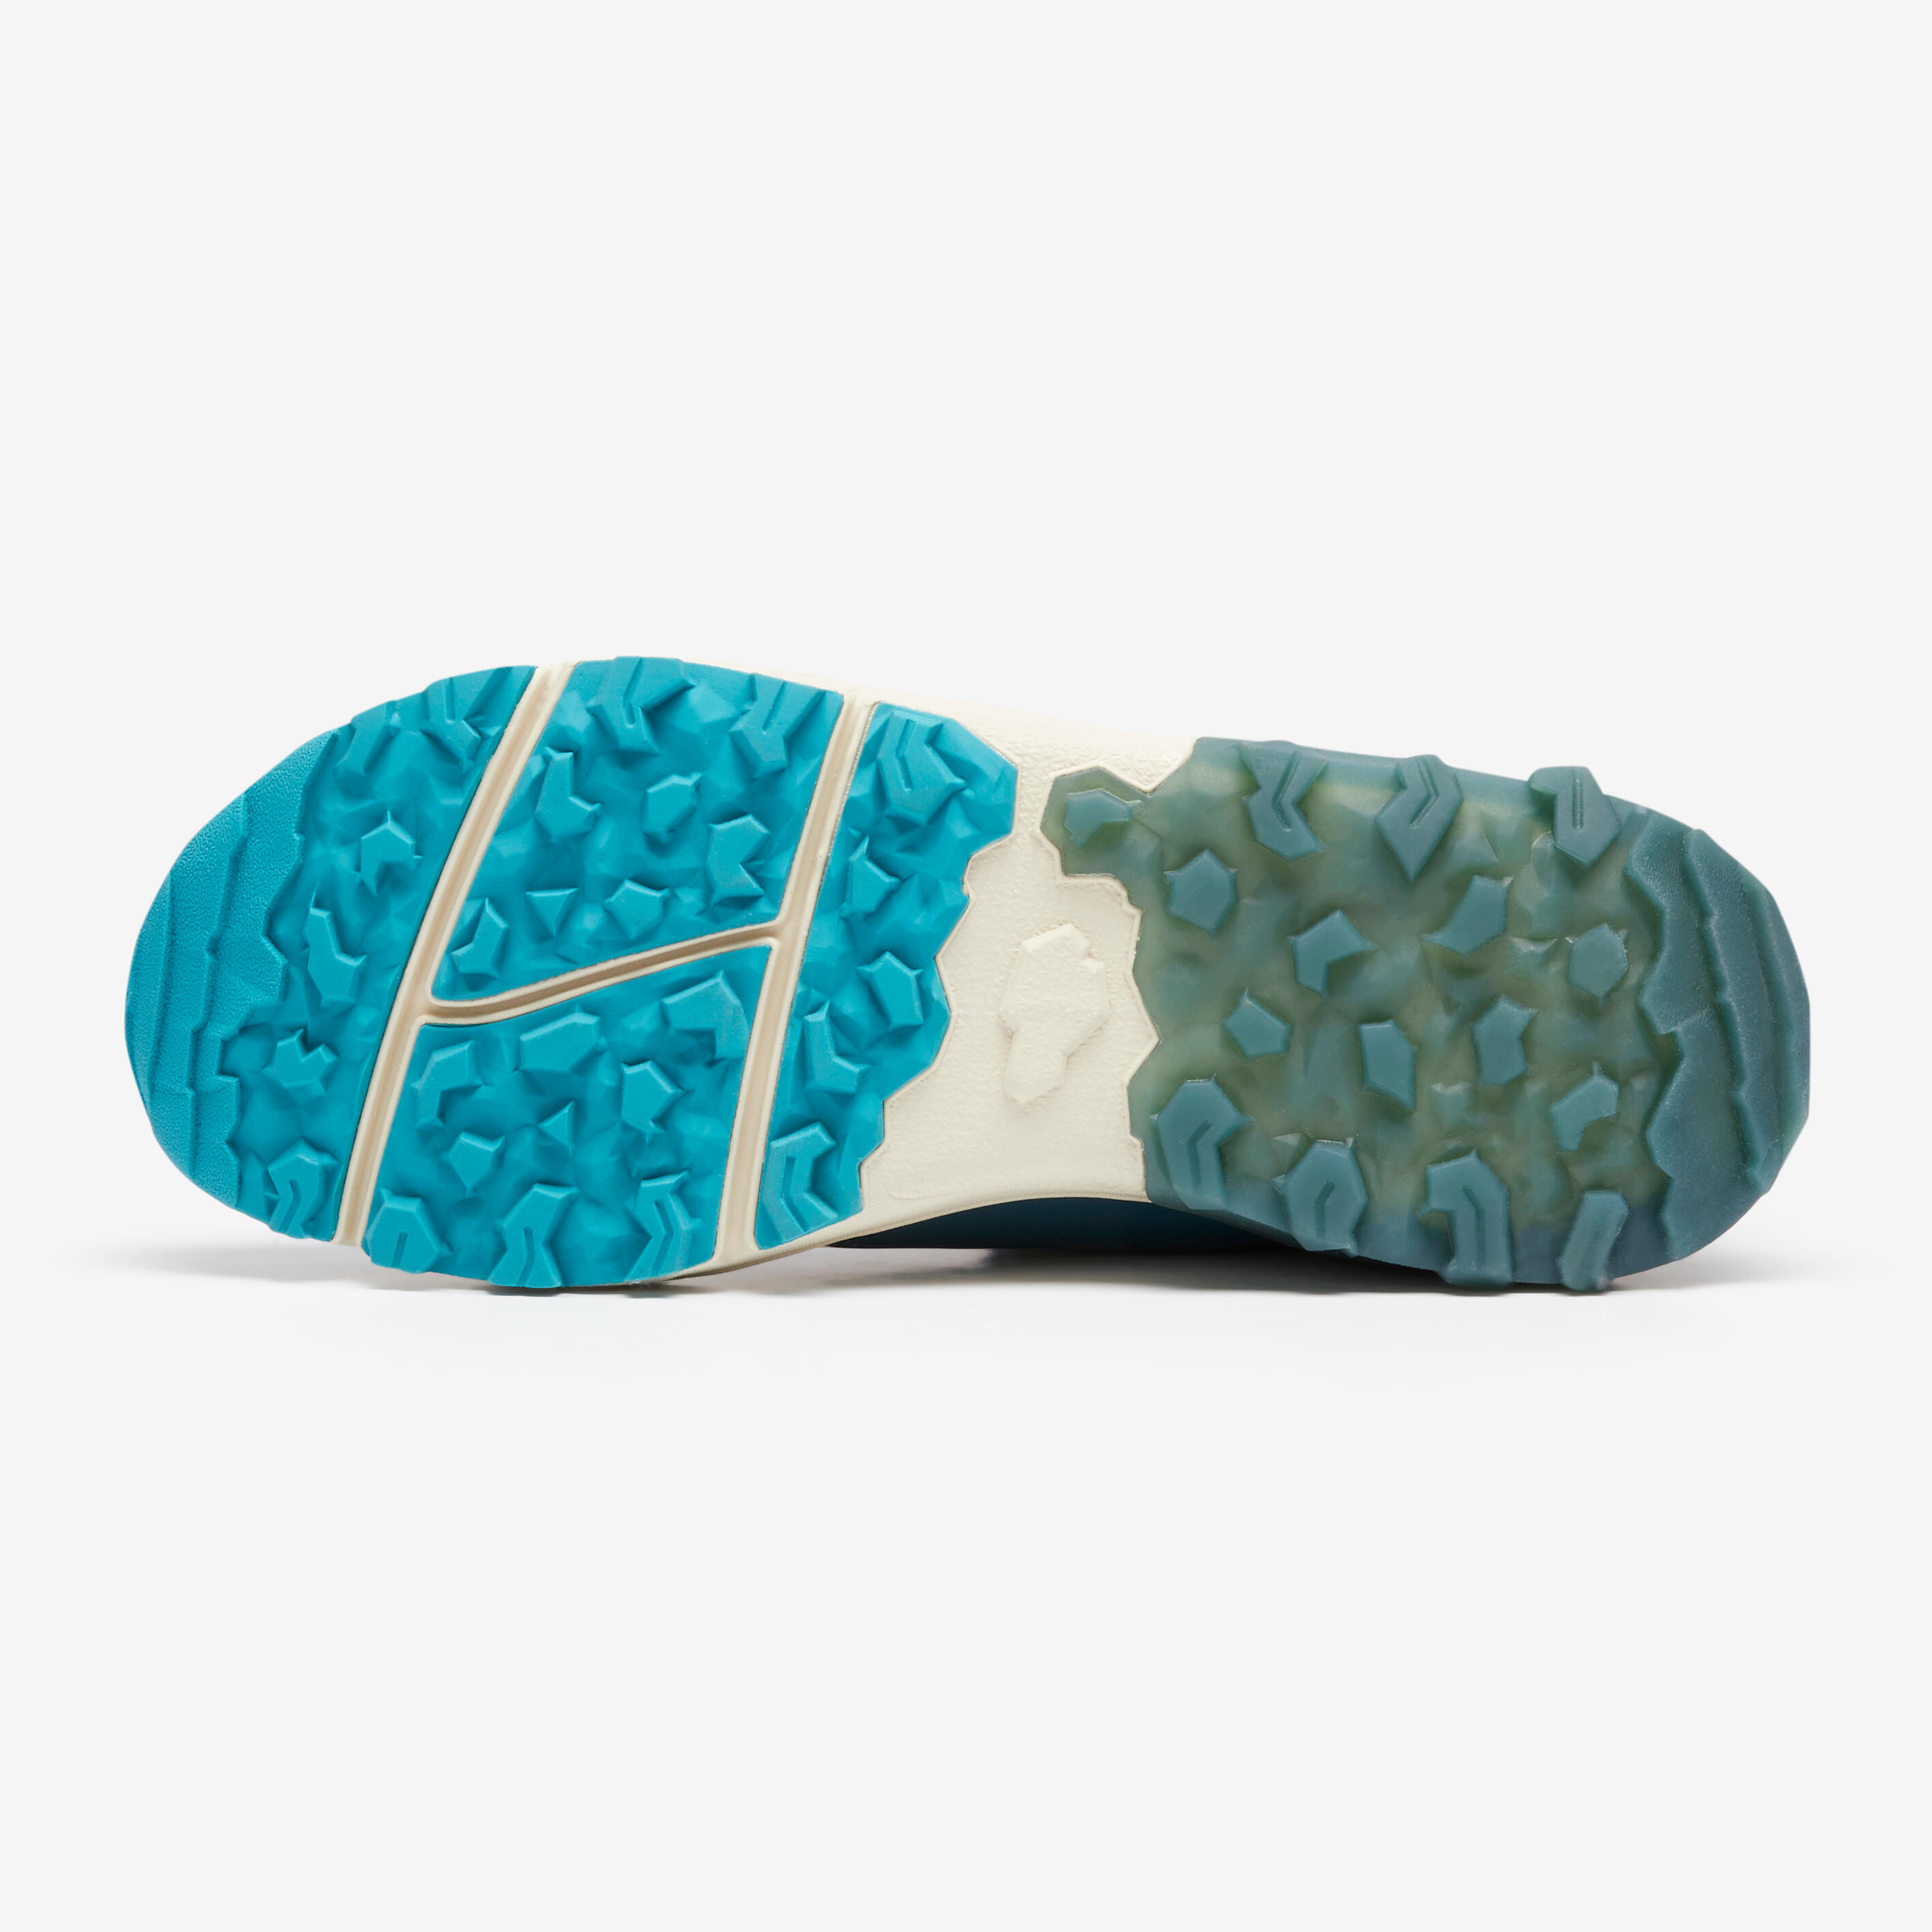 NW 500 Nordic Walking Breathable Shoes - Turquoise 2/7